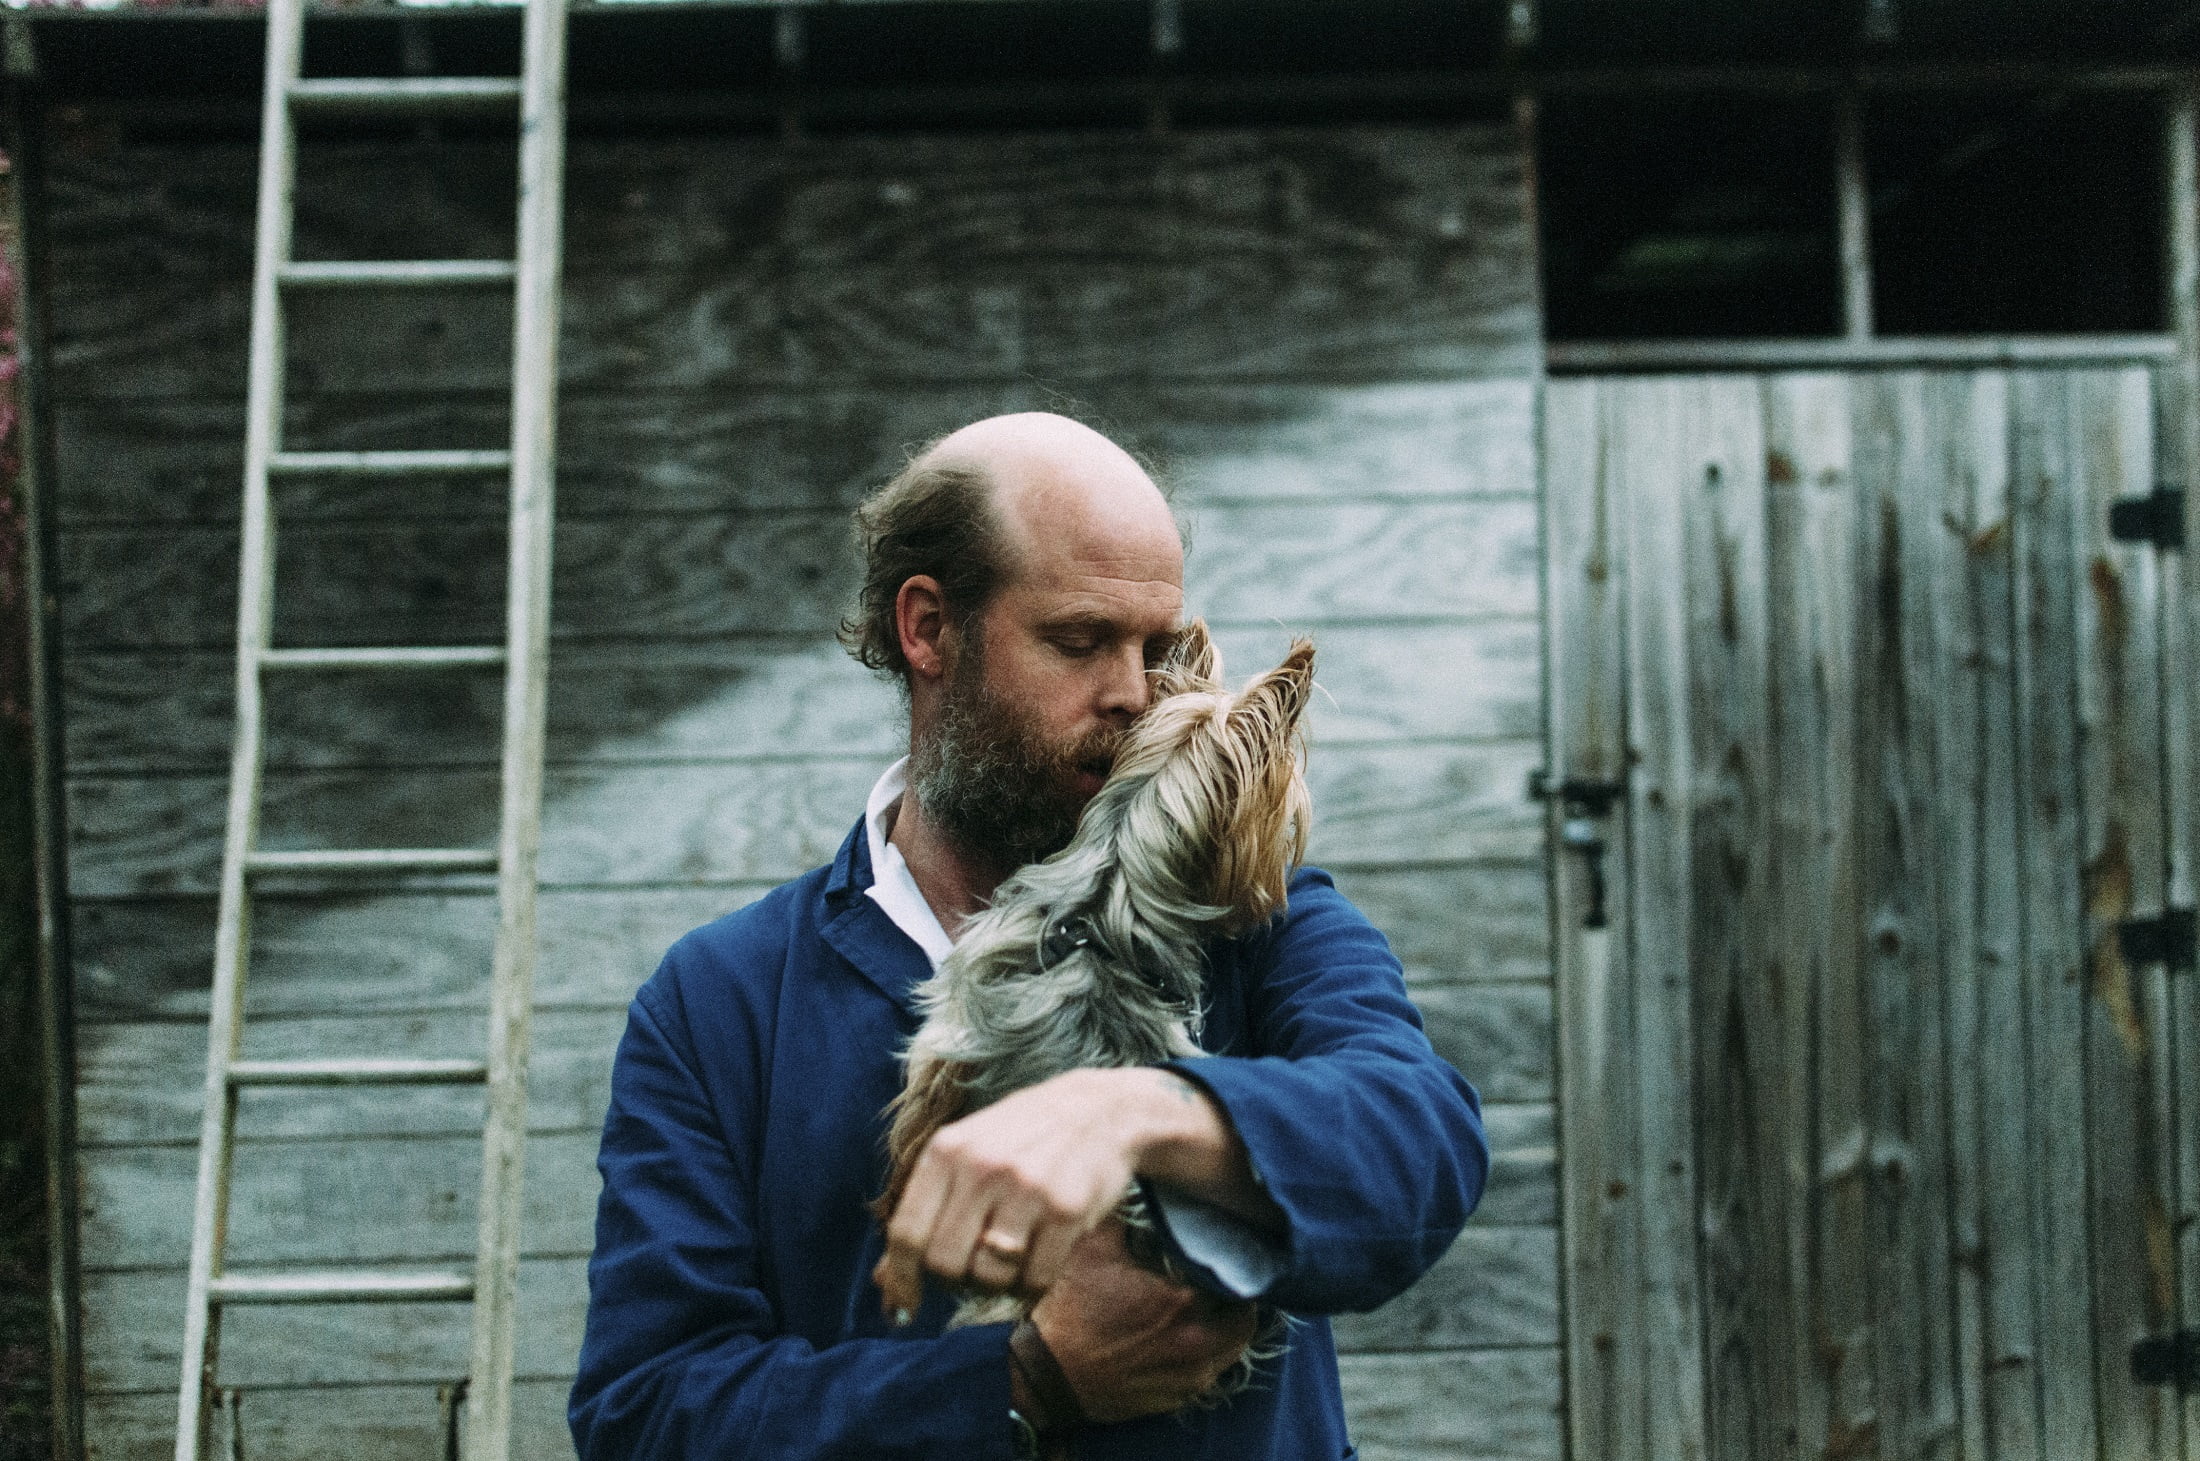 Canon Fodder: Bonnie “Prince” Billy, ‘I See a Darkness’